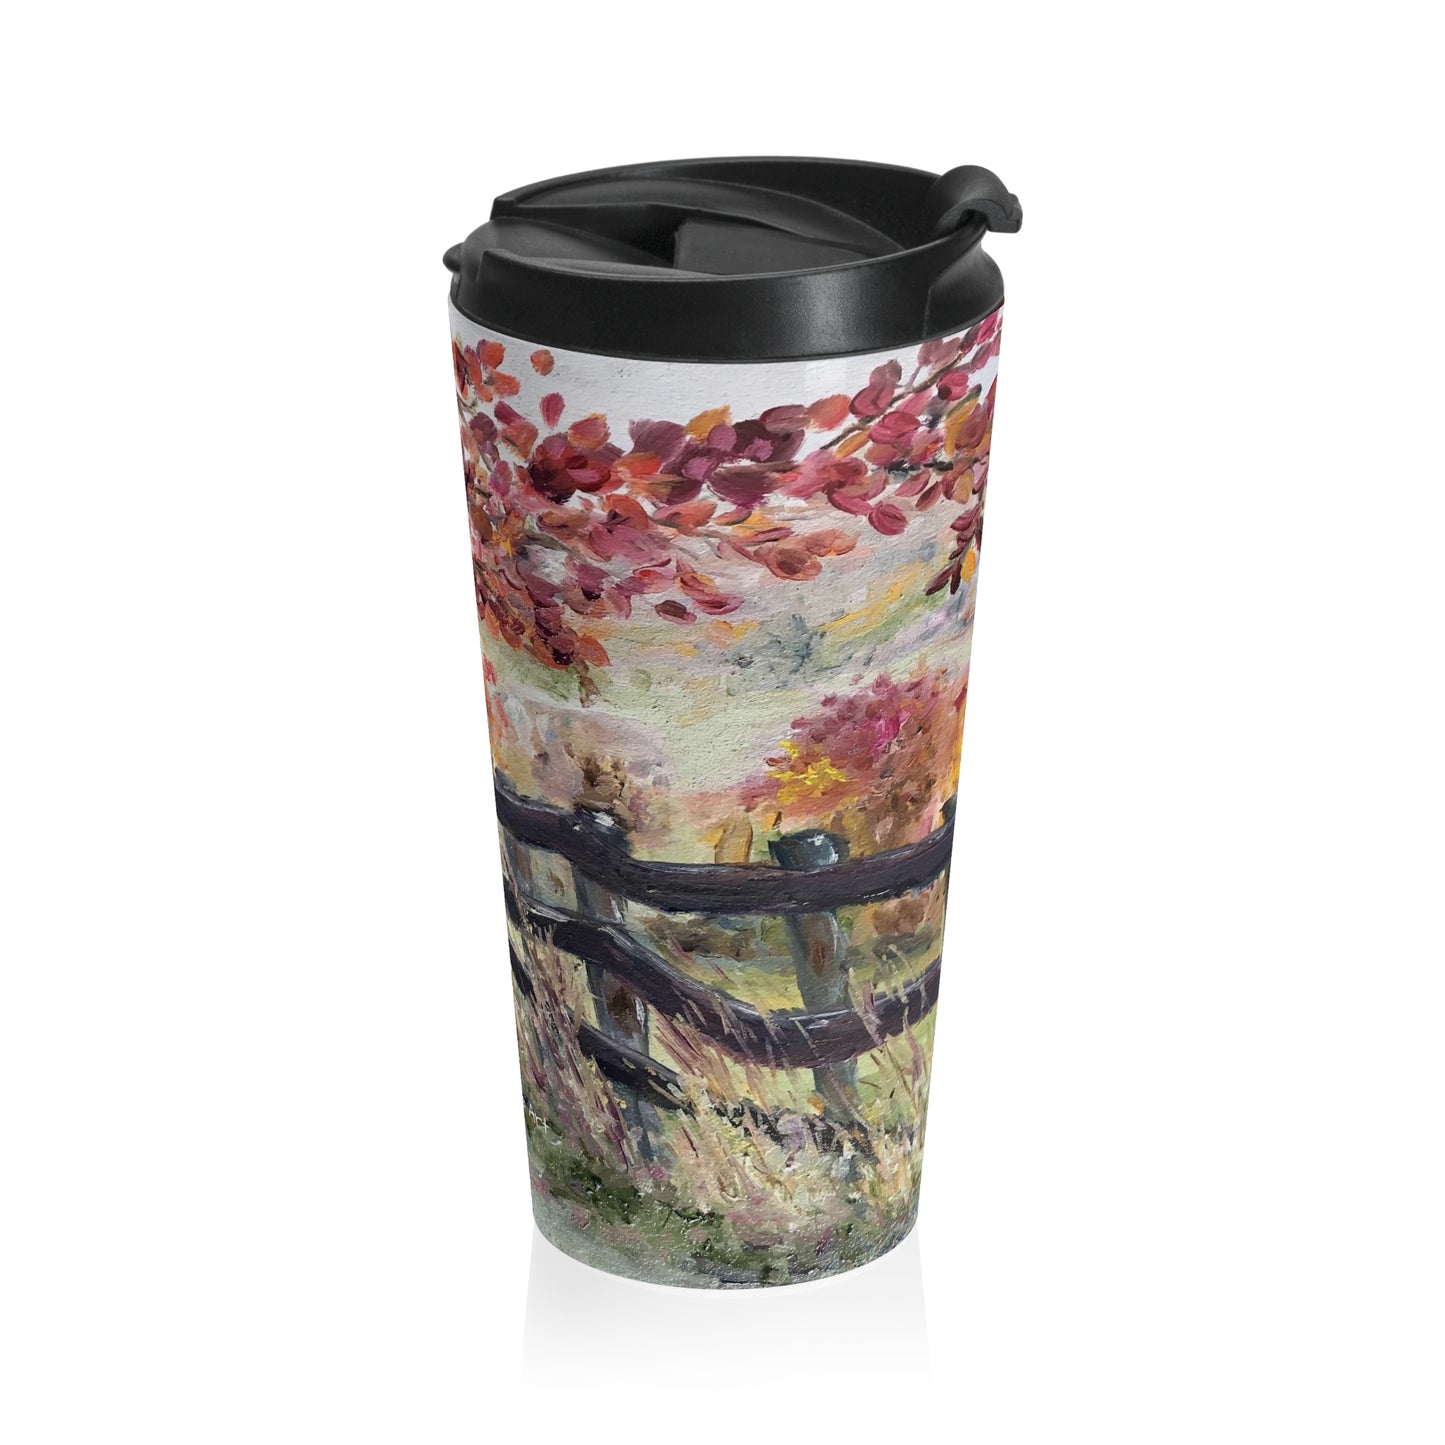 The Rickety Fence Cotswolds Autumn Lane Stainless Steel Travel Mug